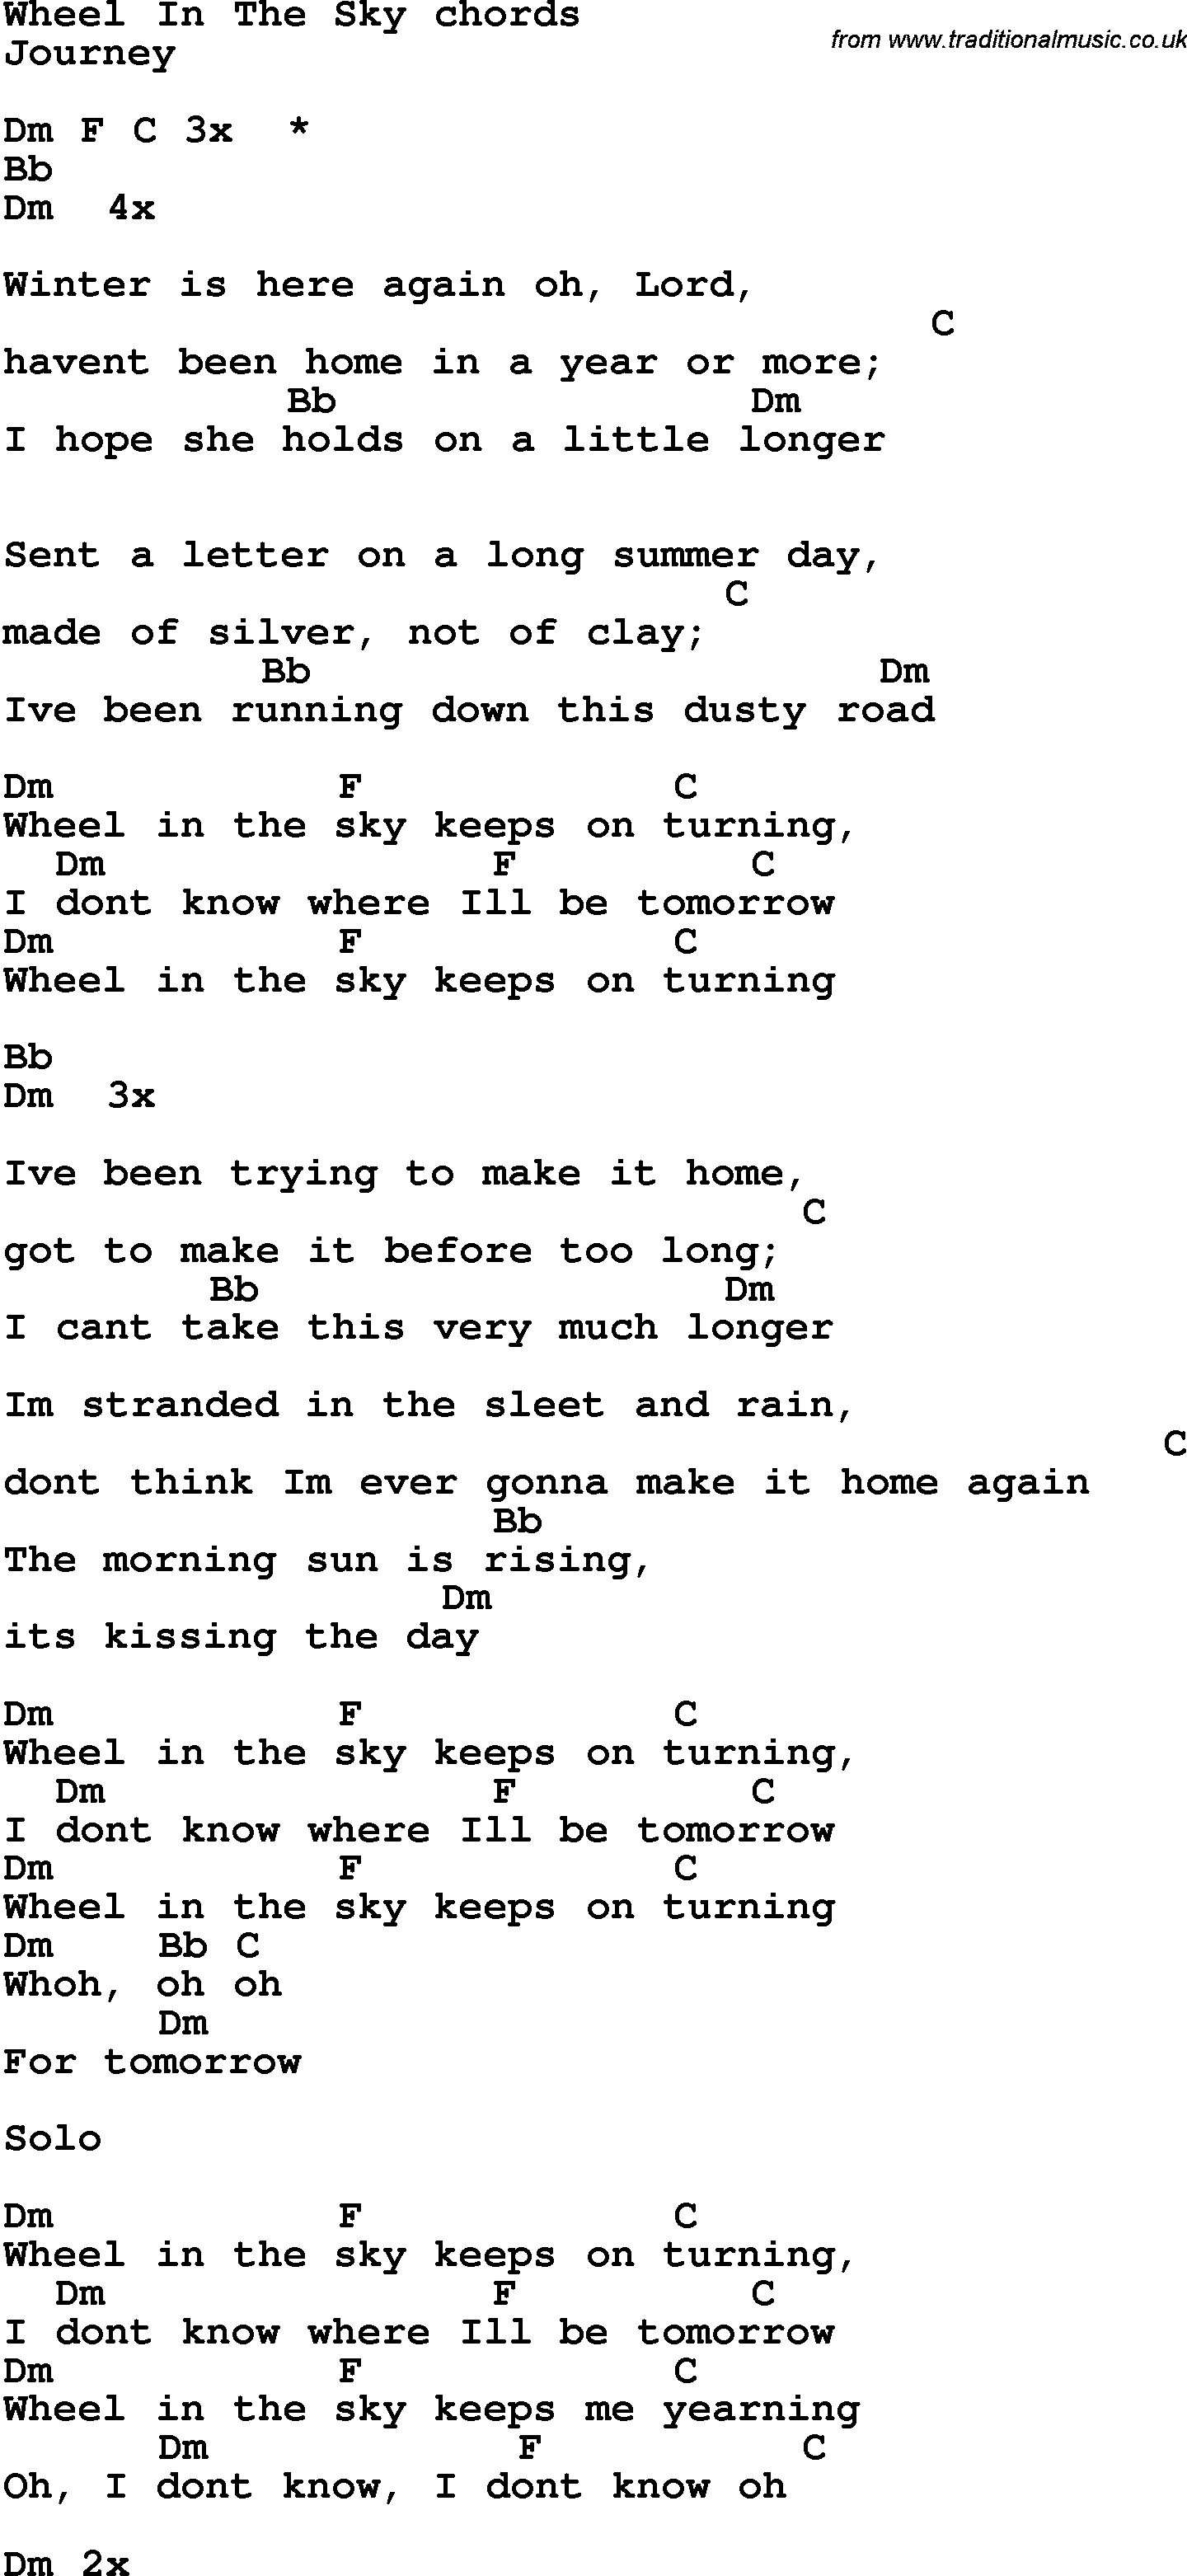 Song Lyrics with guitar chords for Wheel In The Sky